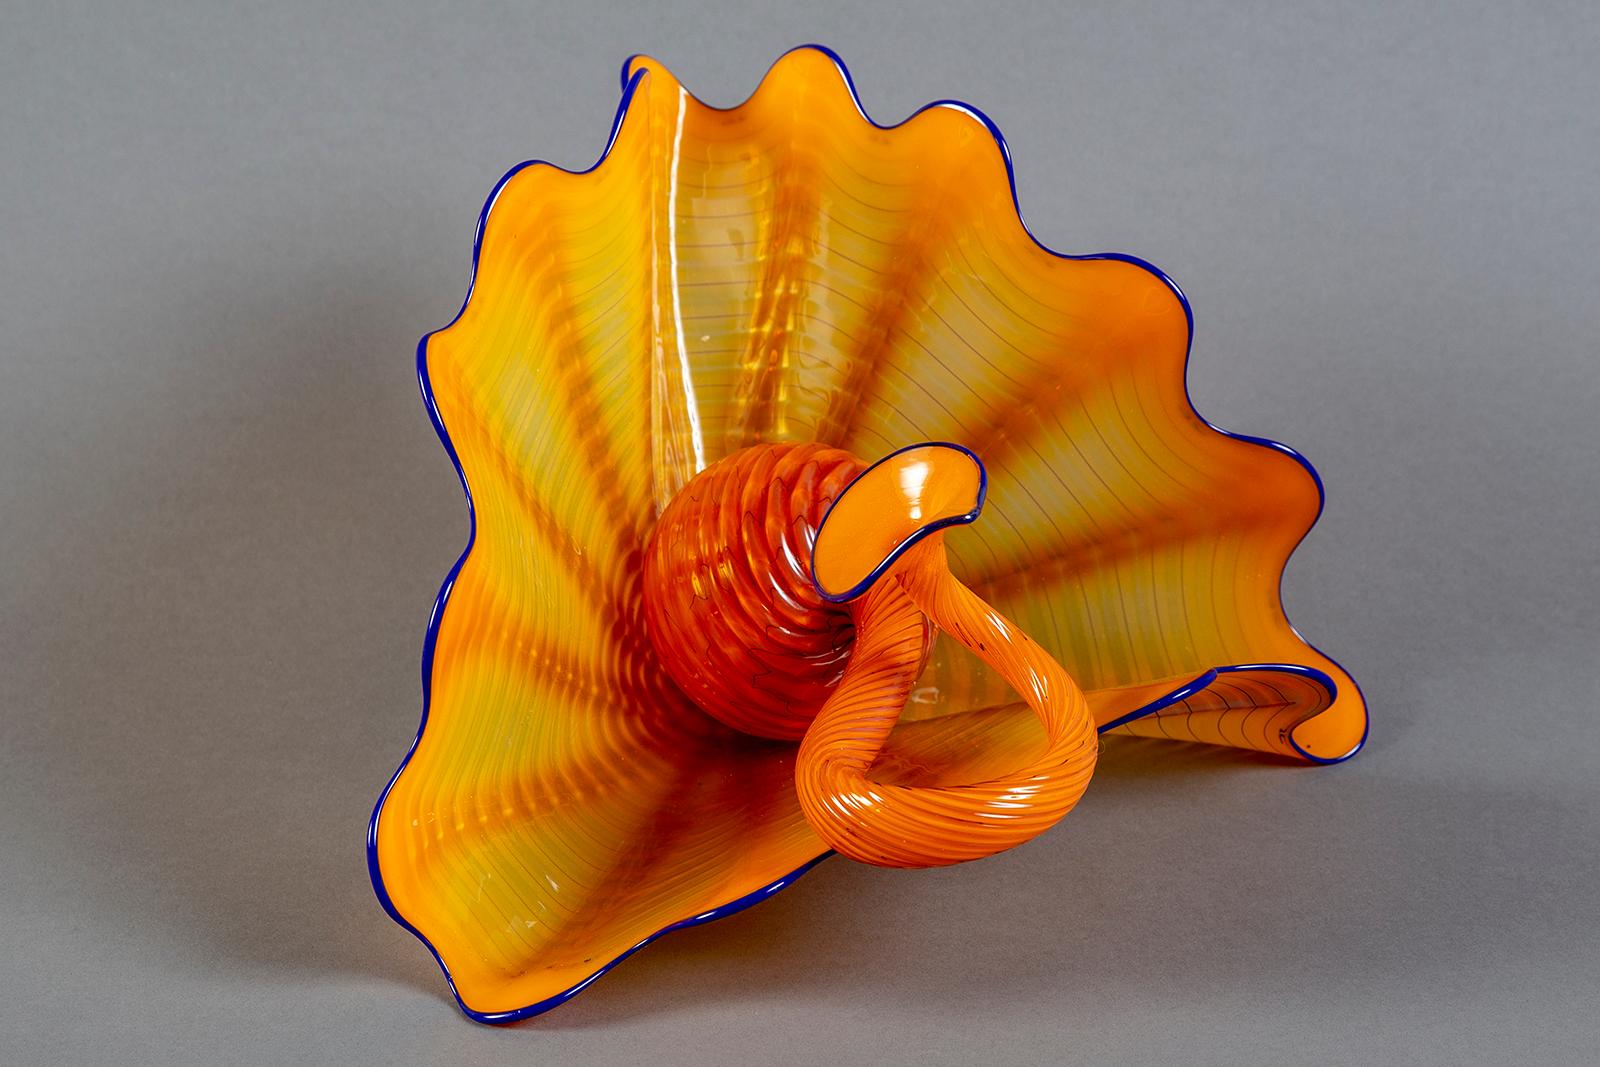 Dale Chihuly Wild Poppy Persian Set Contemporary Glass Art For Sale 1